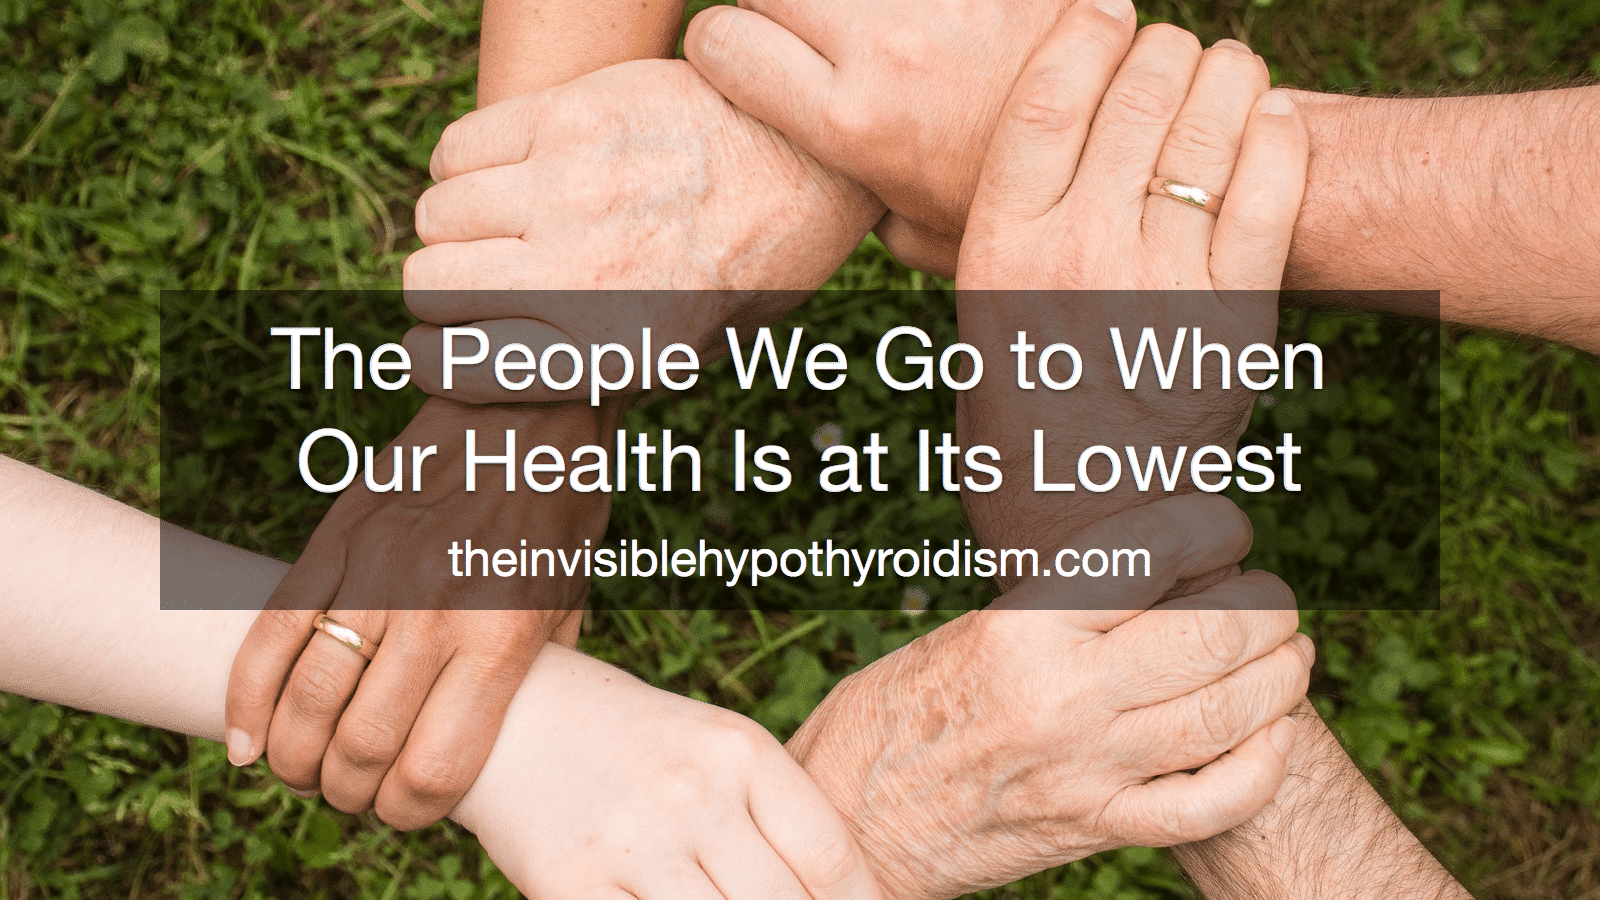 The People We Go to When Our Health Is at Its Lowest